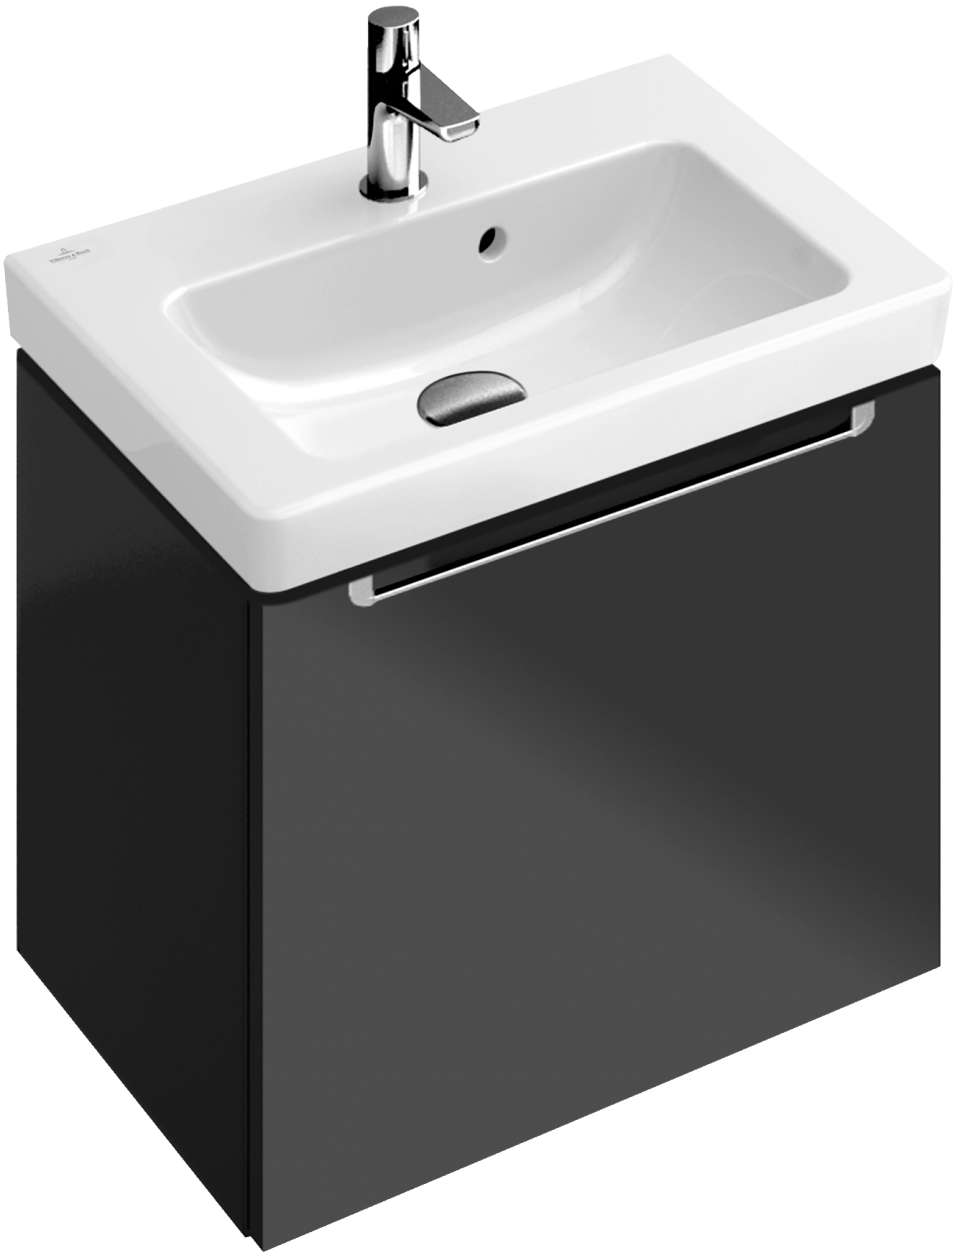 Sink PNG Image - PurePNG | Free transparent CC0 PNG Image Library